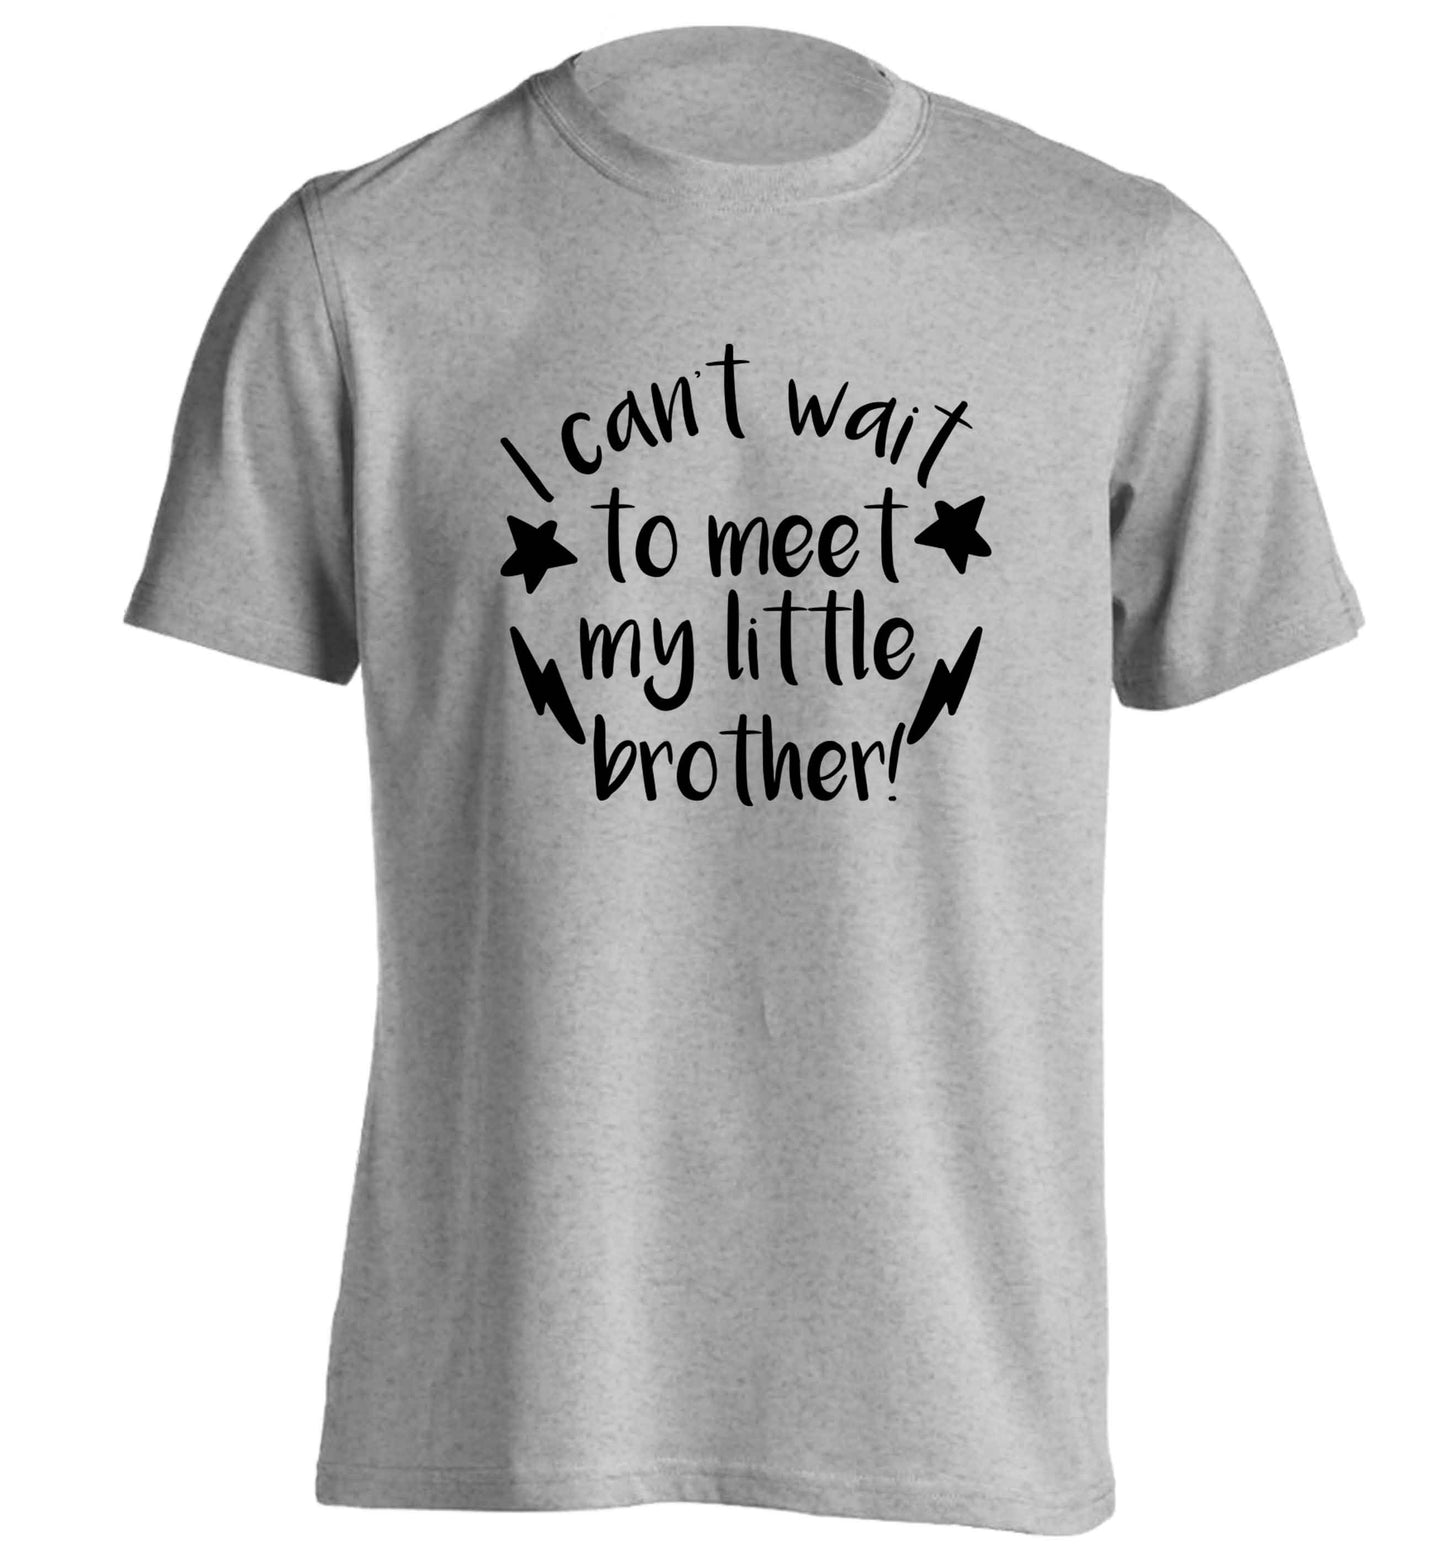 I can't wait to meet my sister! adults unisex grey Tshirt 2XL